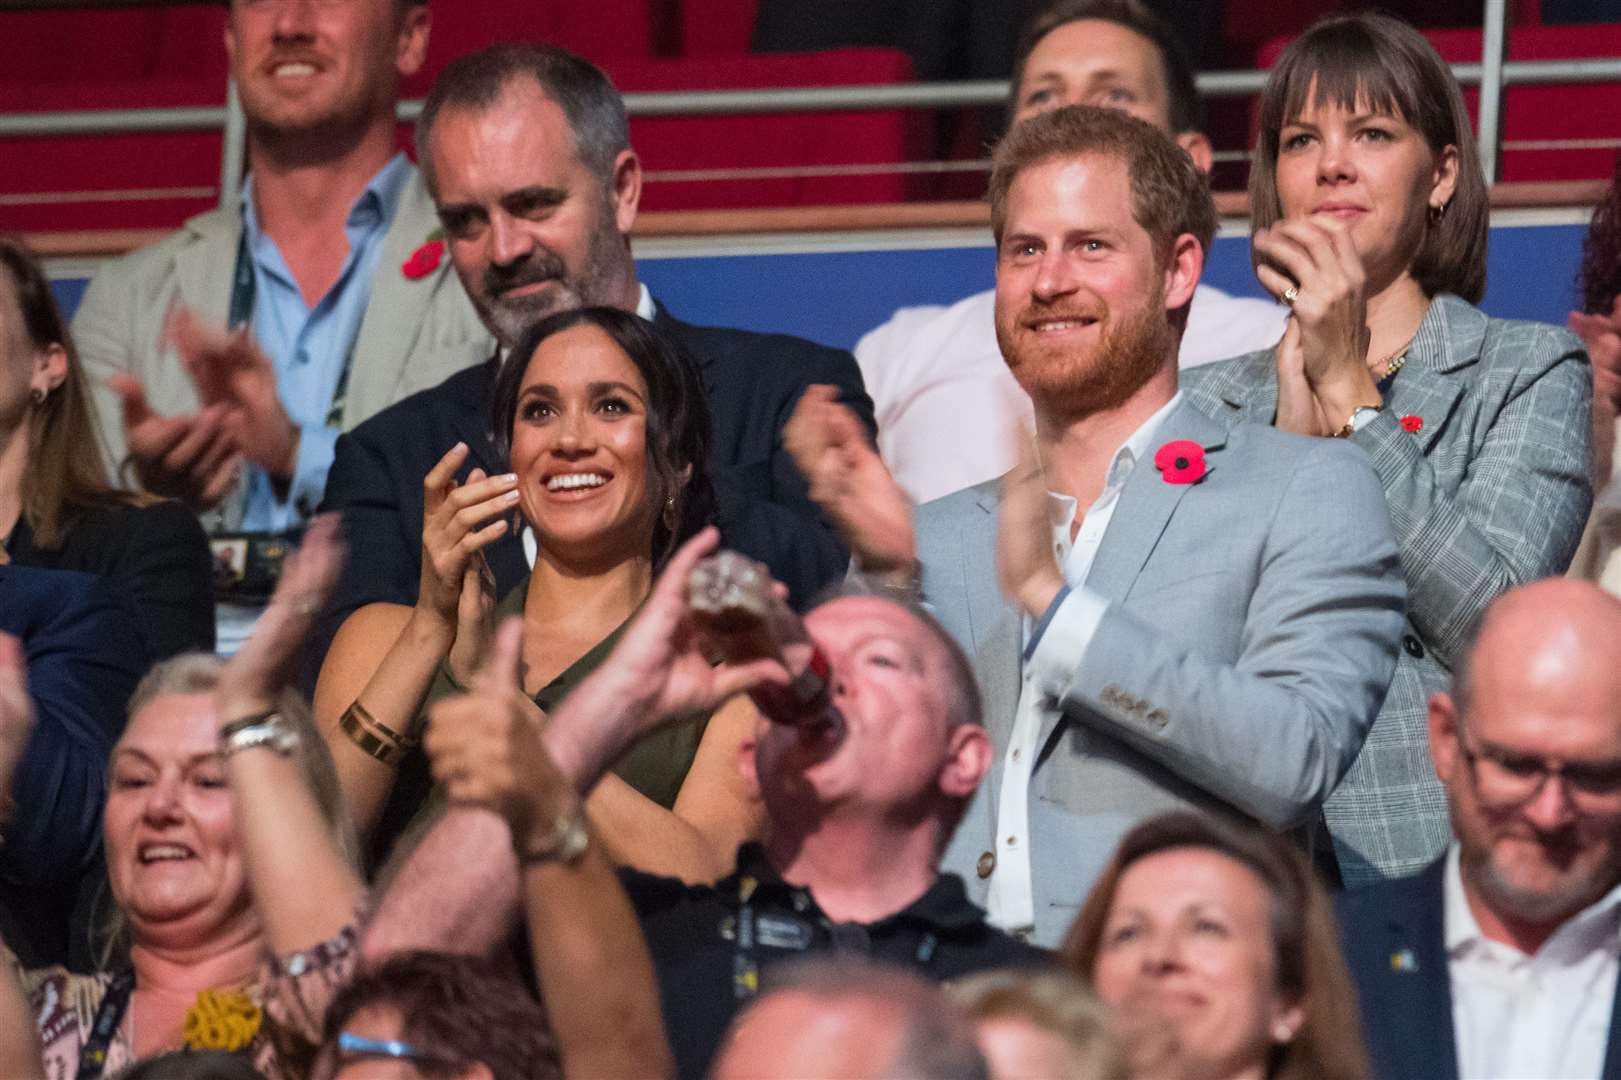 The Duke and Duchess of Sussex at the Invictus Games in 2018 (Dominic Lipinski/PA)